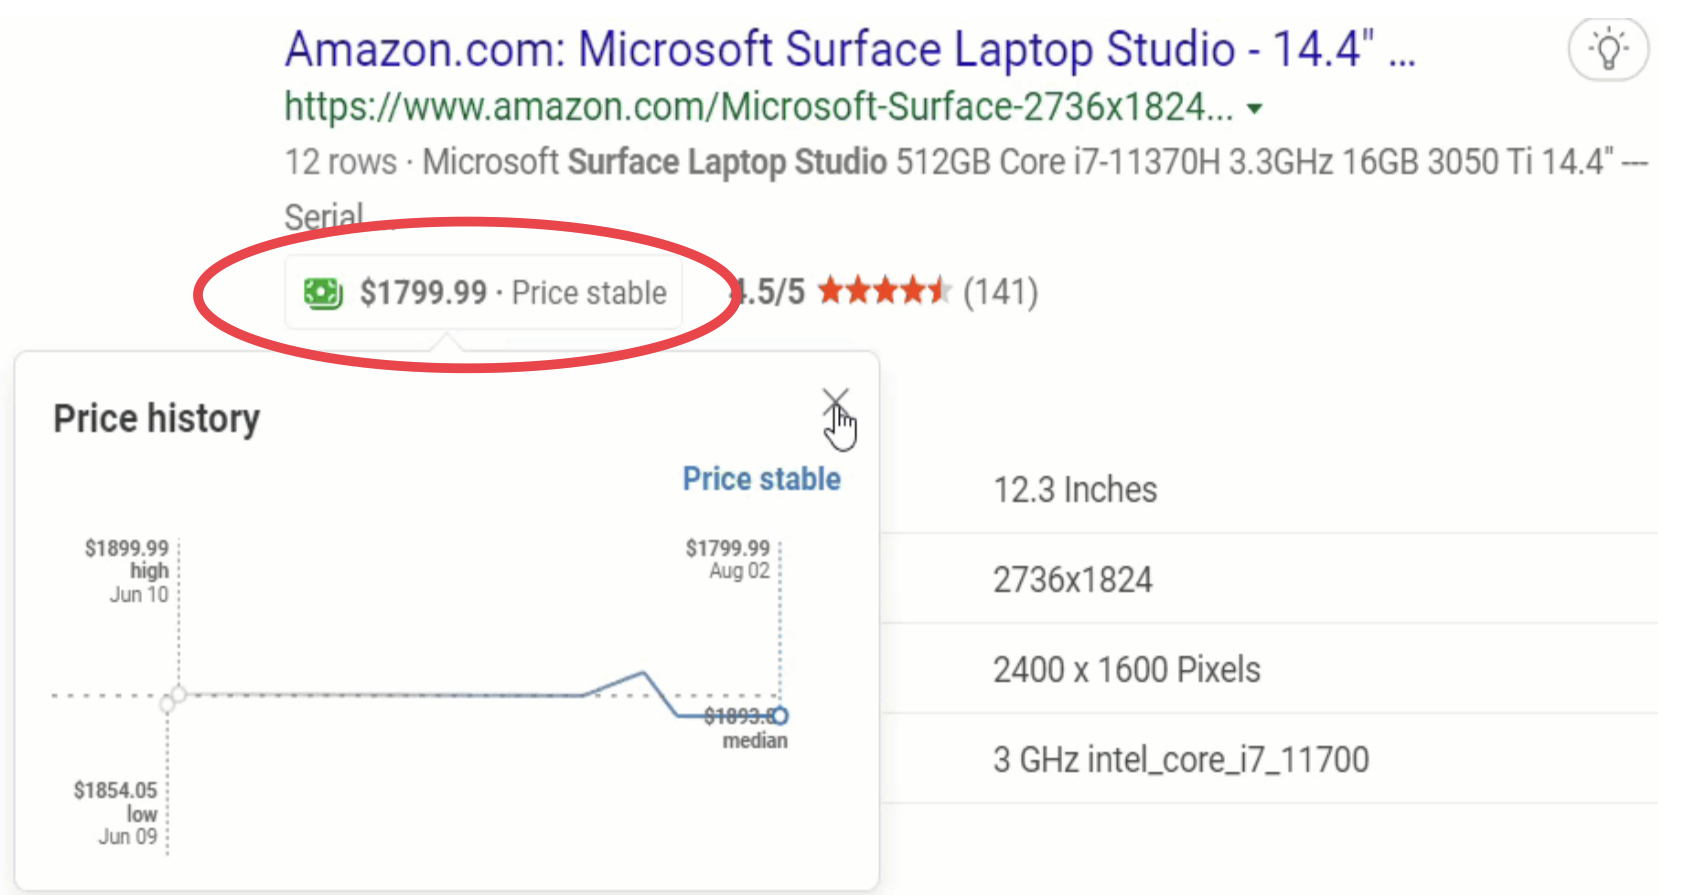 Microsoft Bing Adds Coupon Codes To Shopping Searches